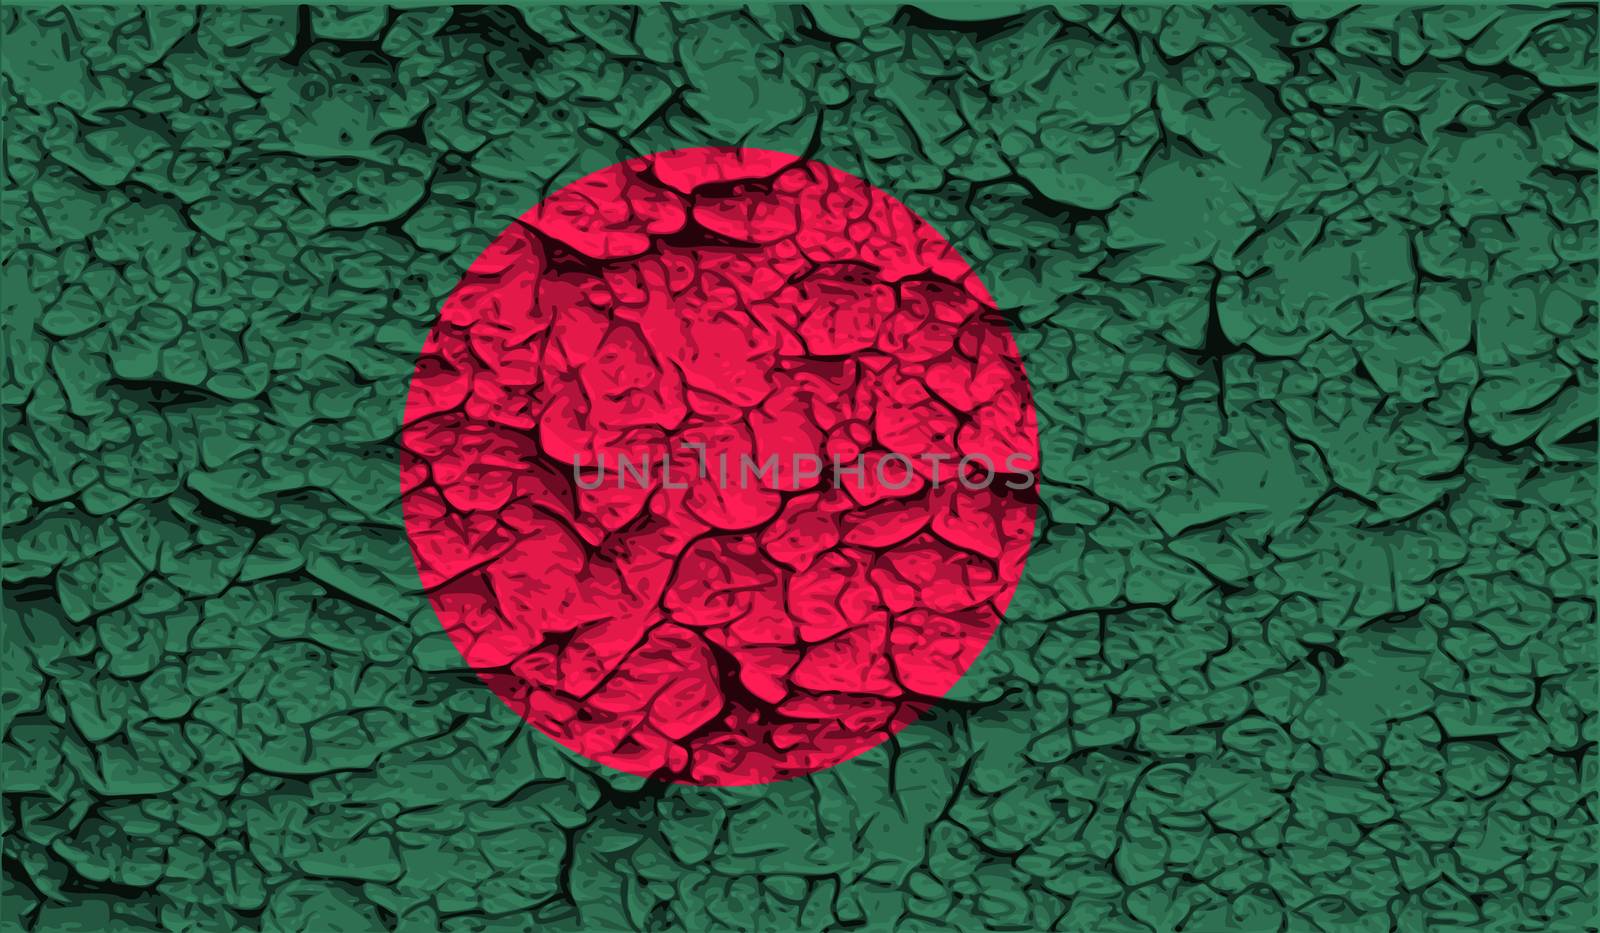 Flag of Bangladesh with old texture.  illustration